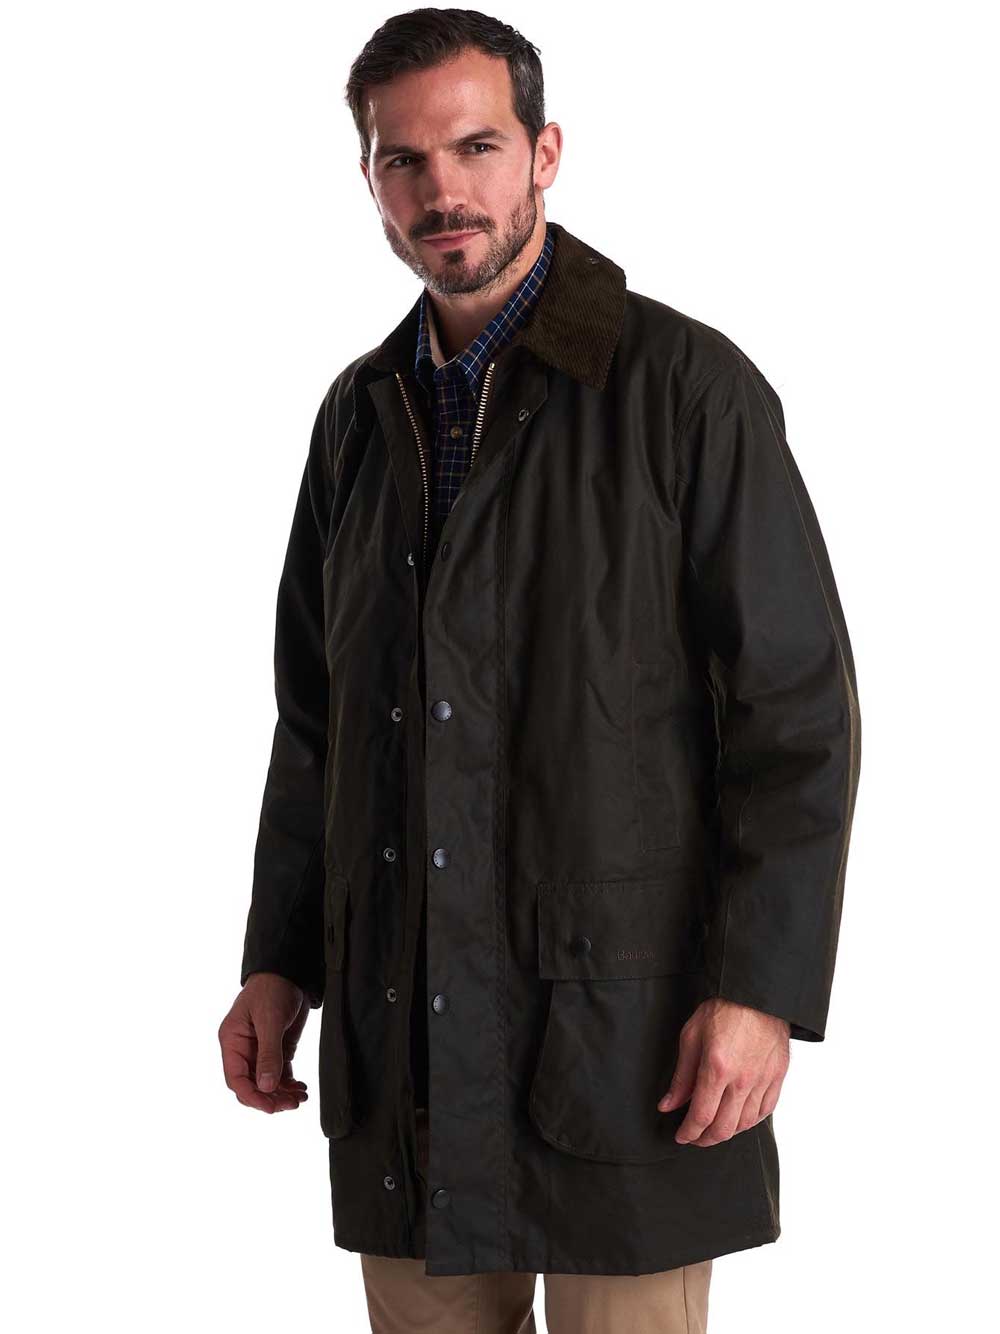 25% OFF BARBOUR Classic Northumbria Wax Jacket - Mens 8oz Sylkoil - Olive